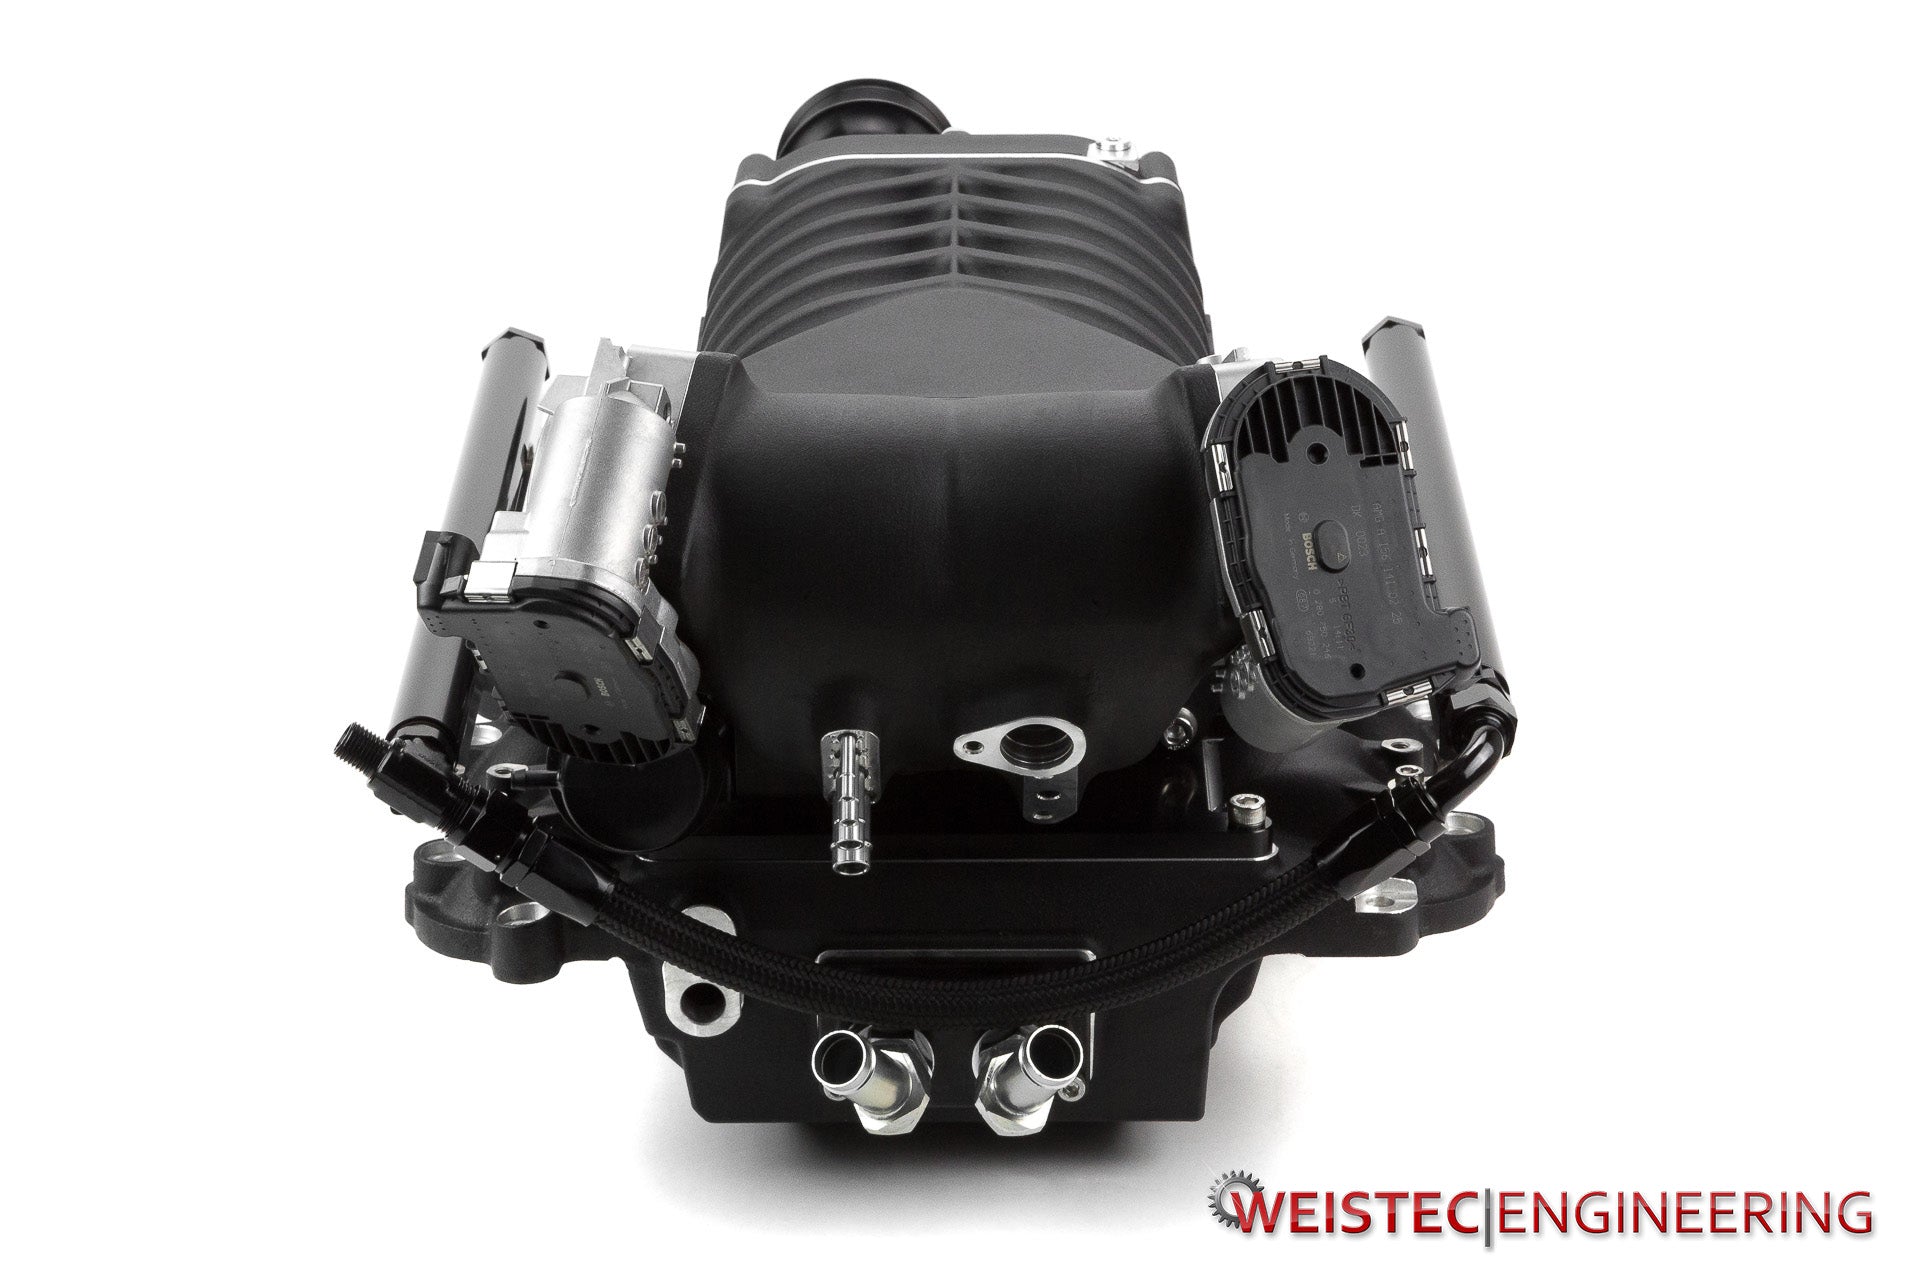 Stage 3 M156 Supercharger System, C63